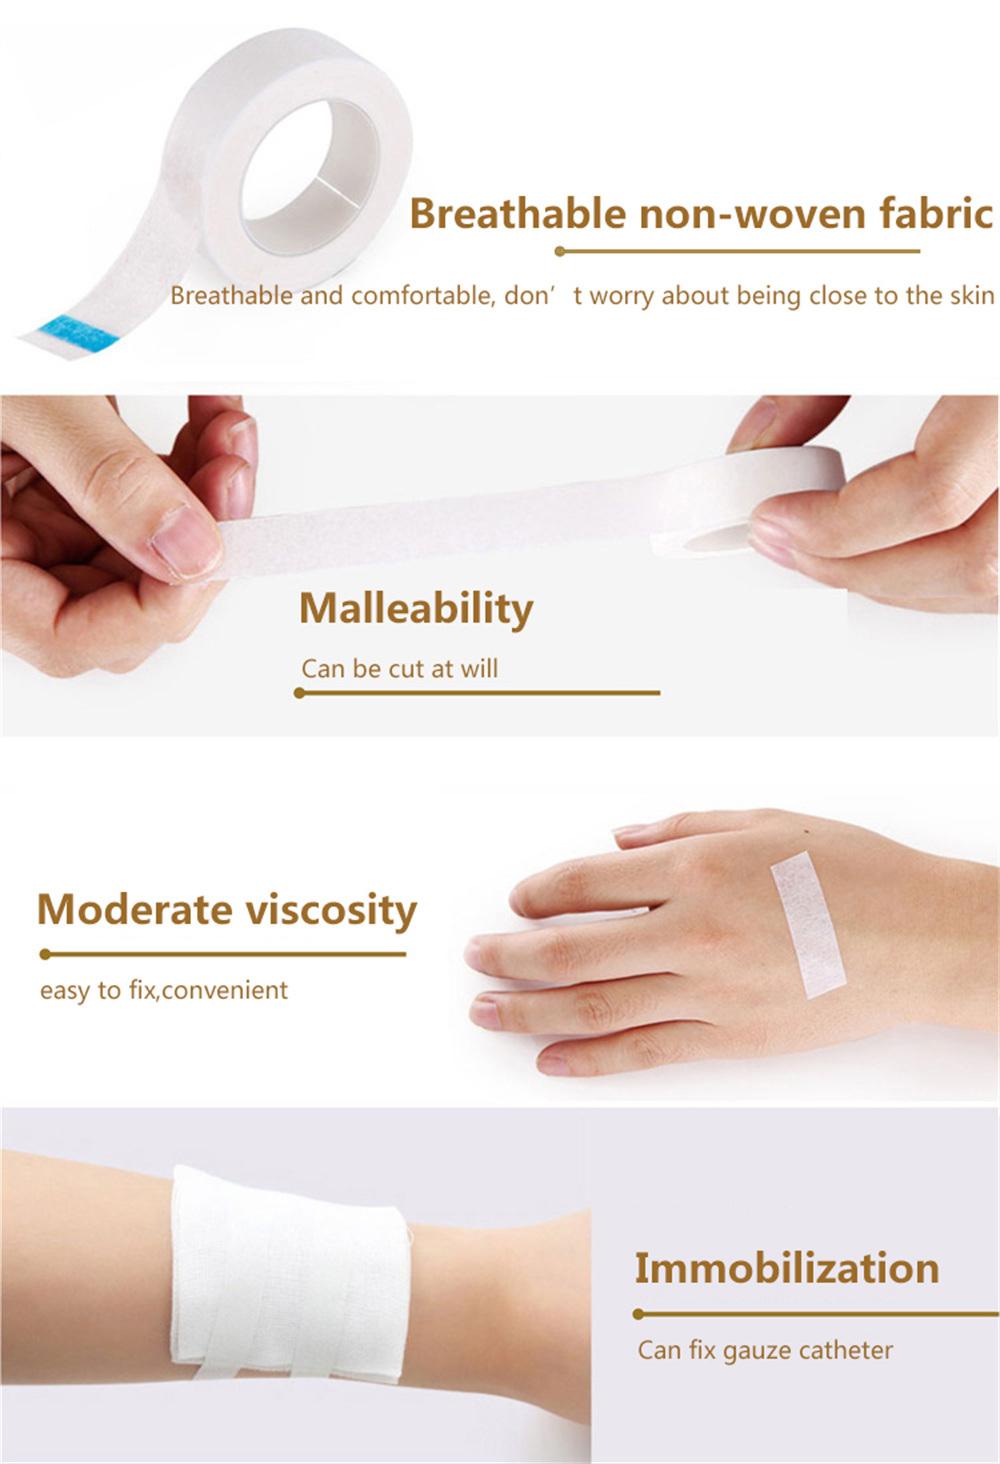 Paper Pore Surgicaltape Easy Tear Non Woven Paper Hyperallergenic Breathable Medicaltape